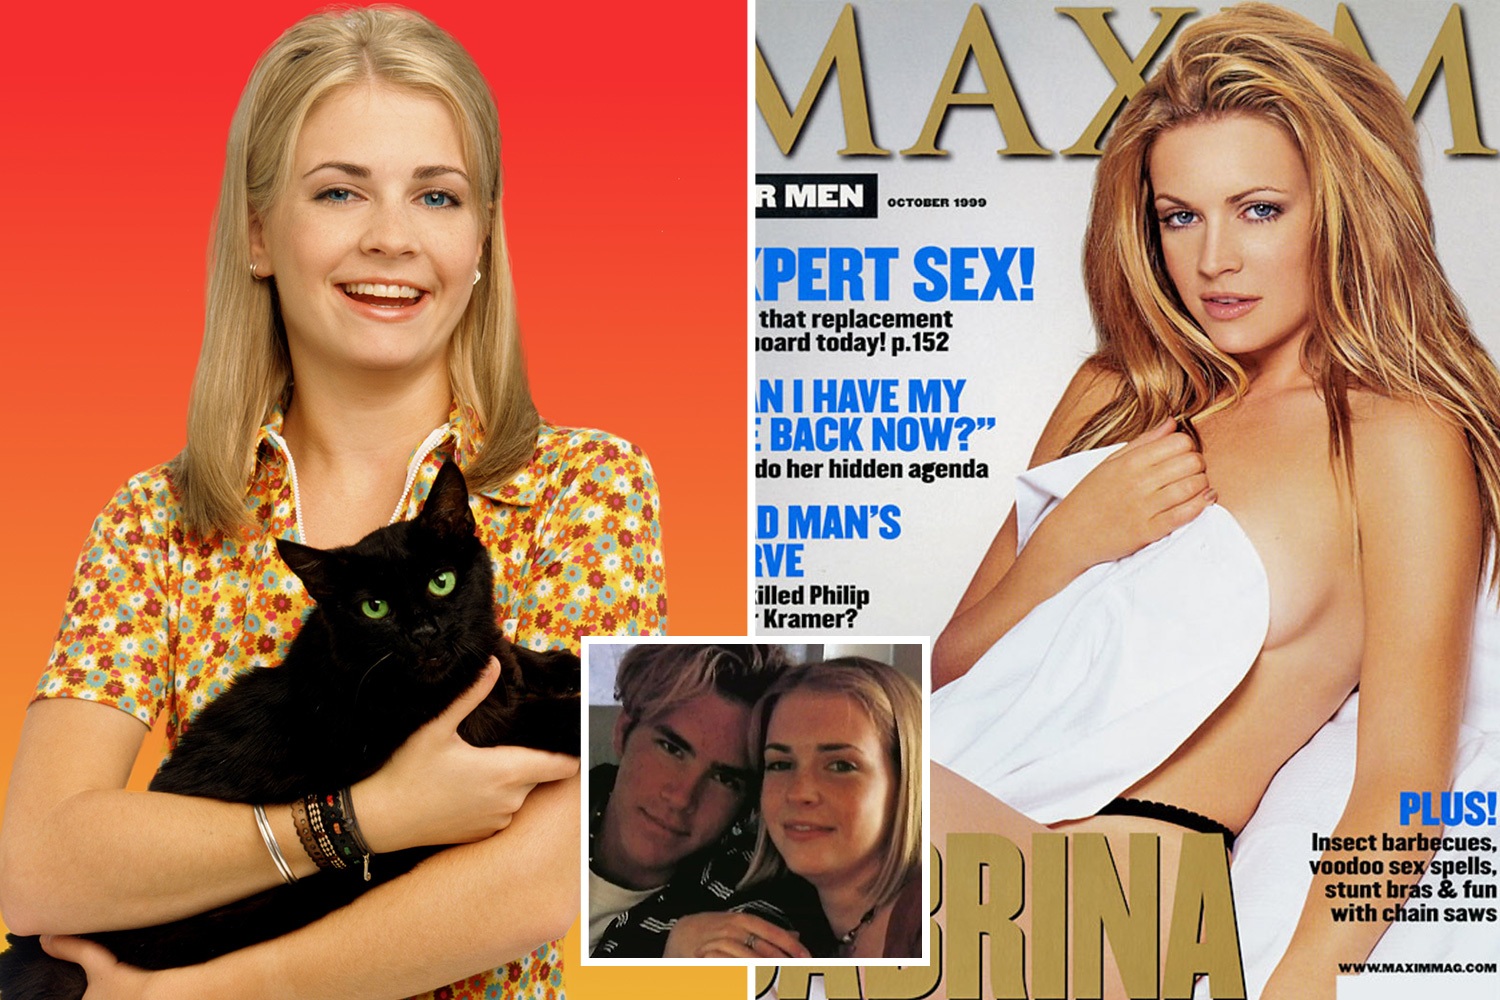 aaron mayers recommends melissa joan hart playboy pic